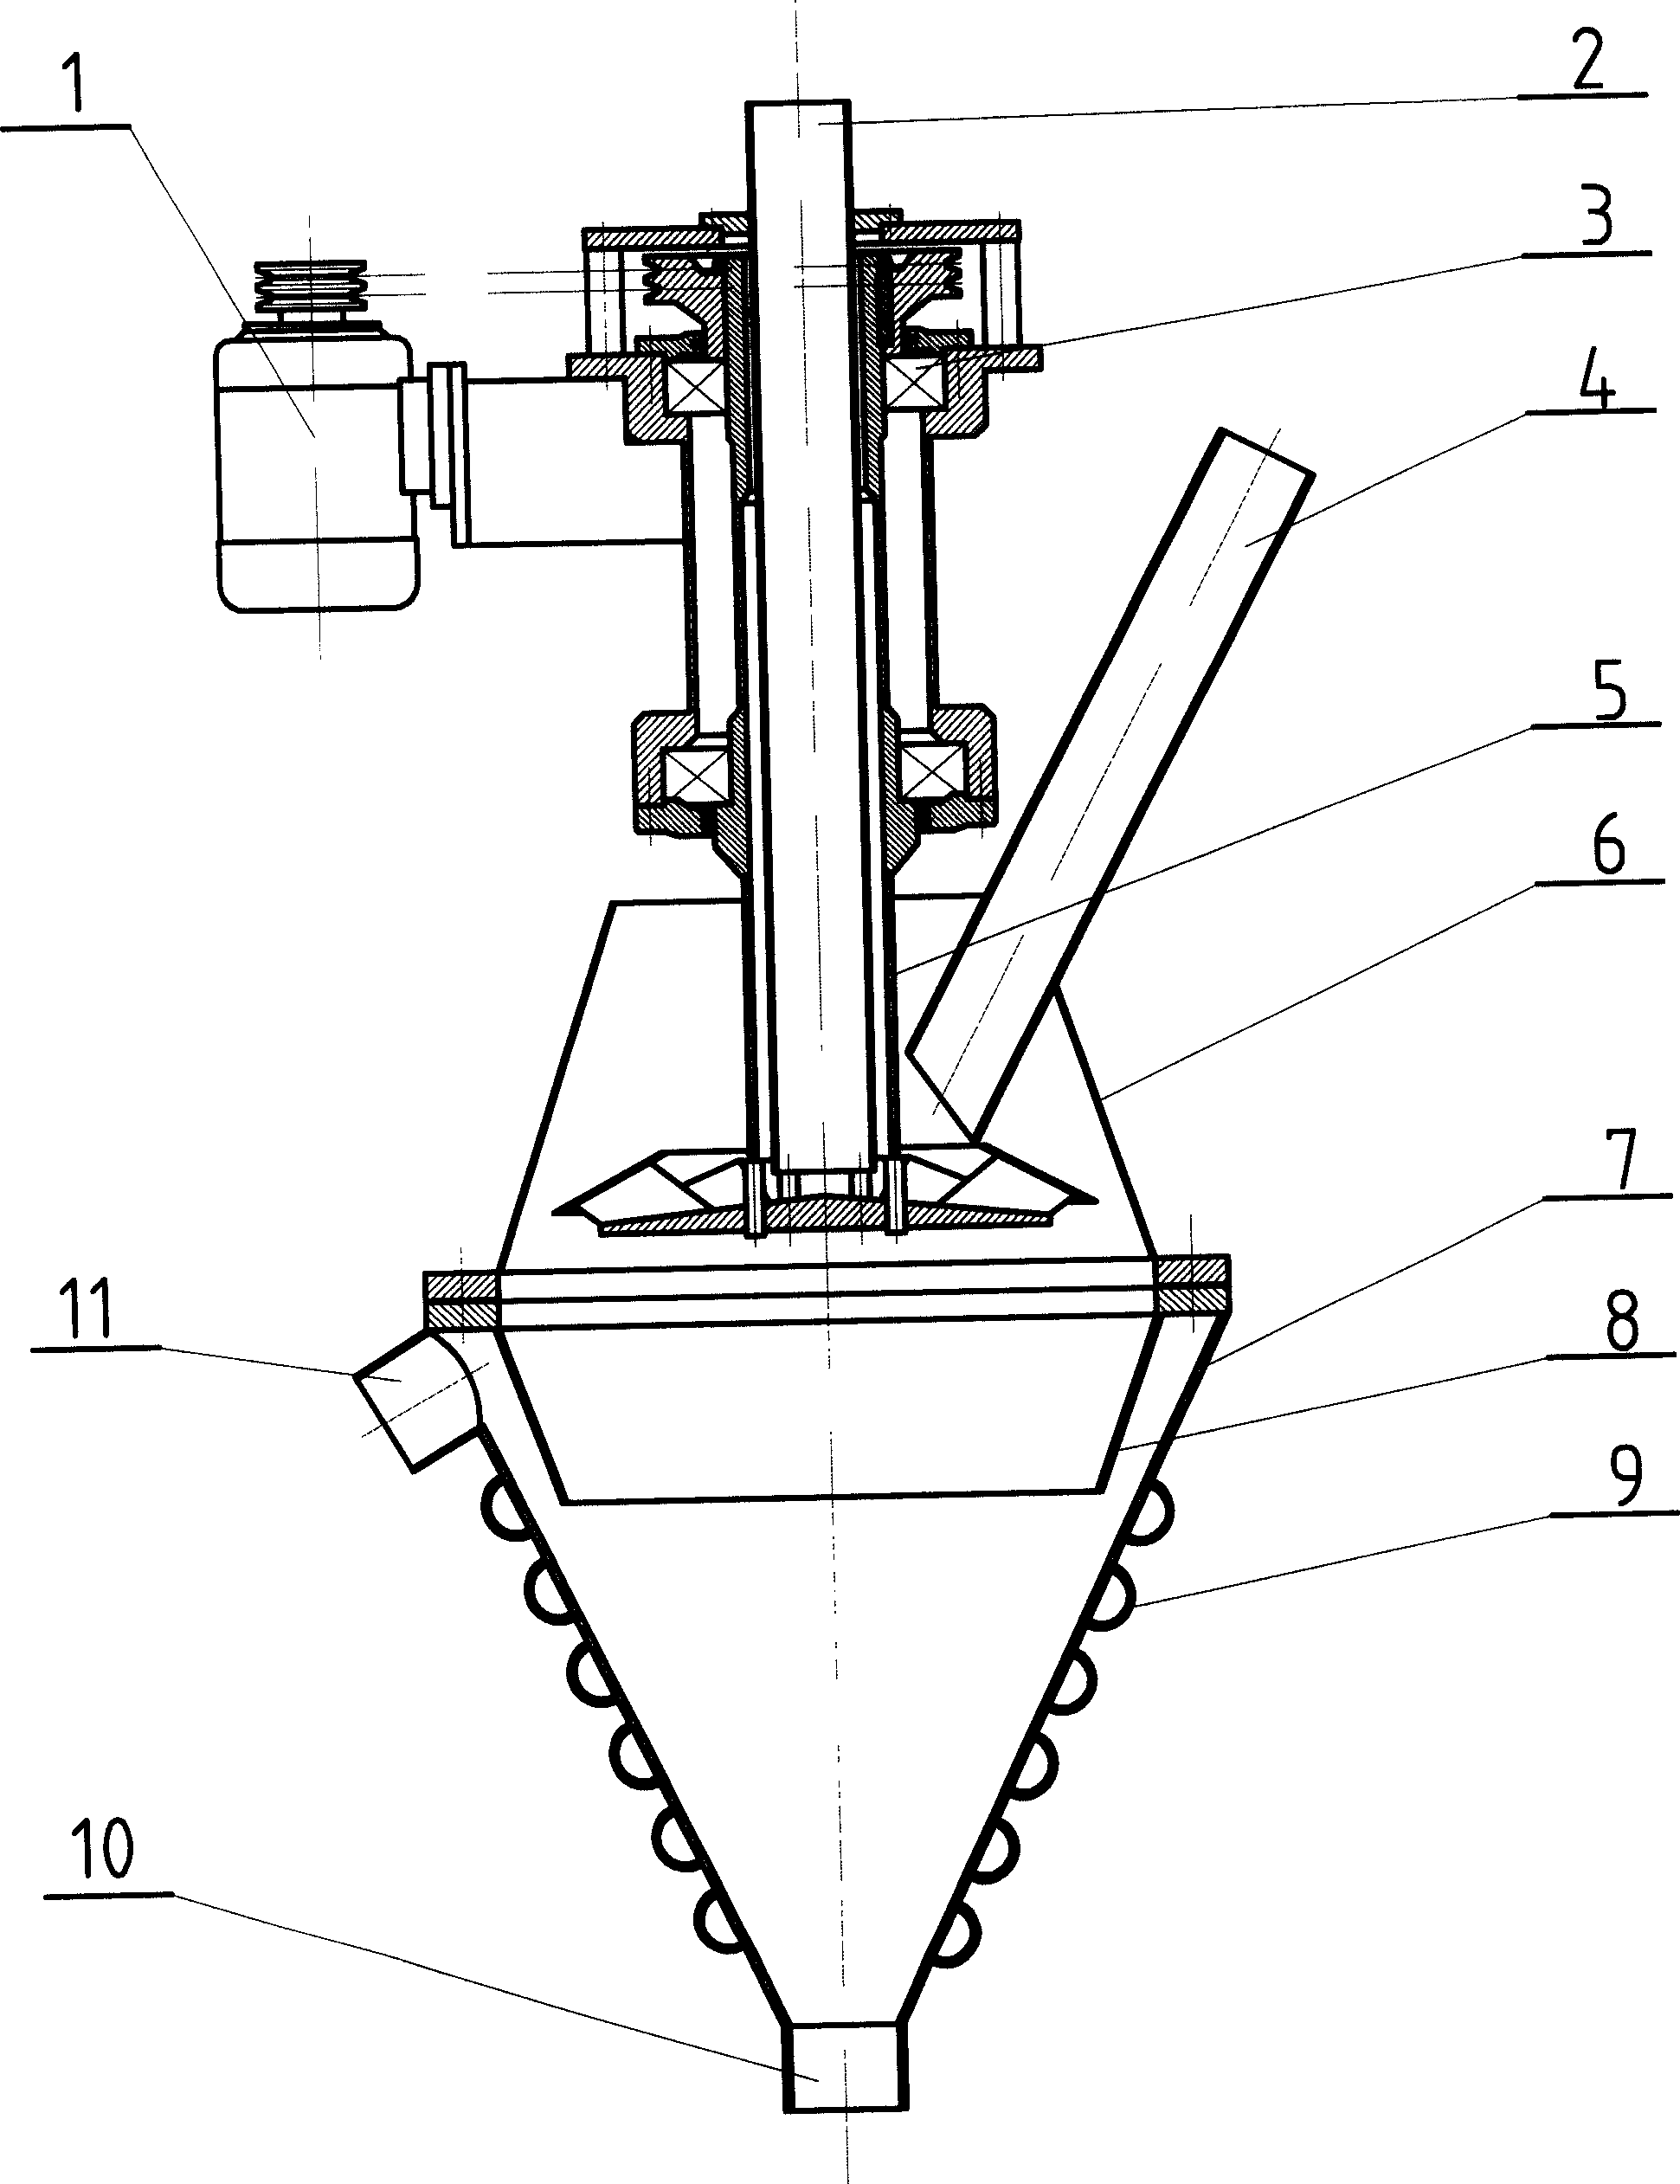 Apparatus for quickly mixing chemical melt and solid powder